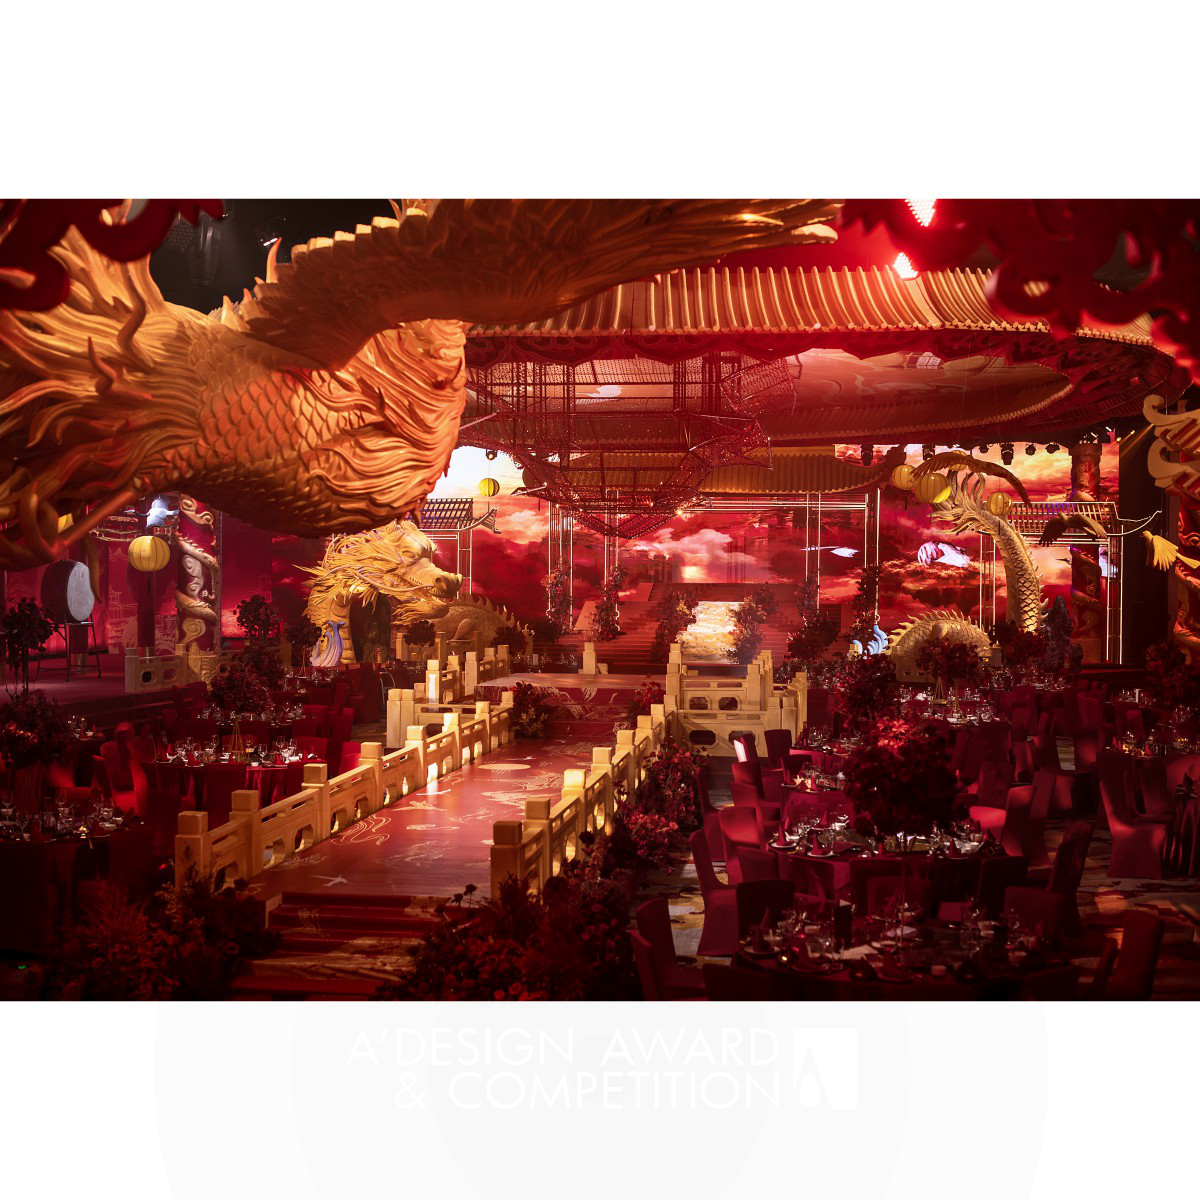 Heshengzhao Bo Yuege Wedding Space by Wei Zhang Bronze Performing Arts, Stage, Style and Scenery Design Award Winner 2024 